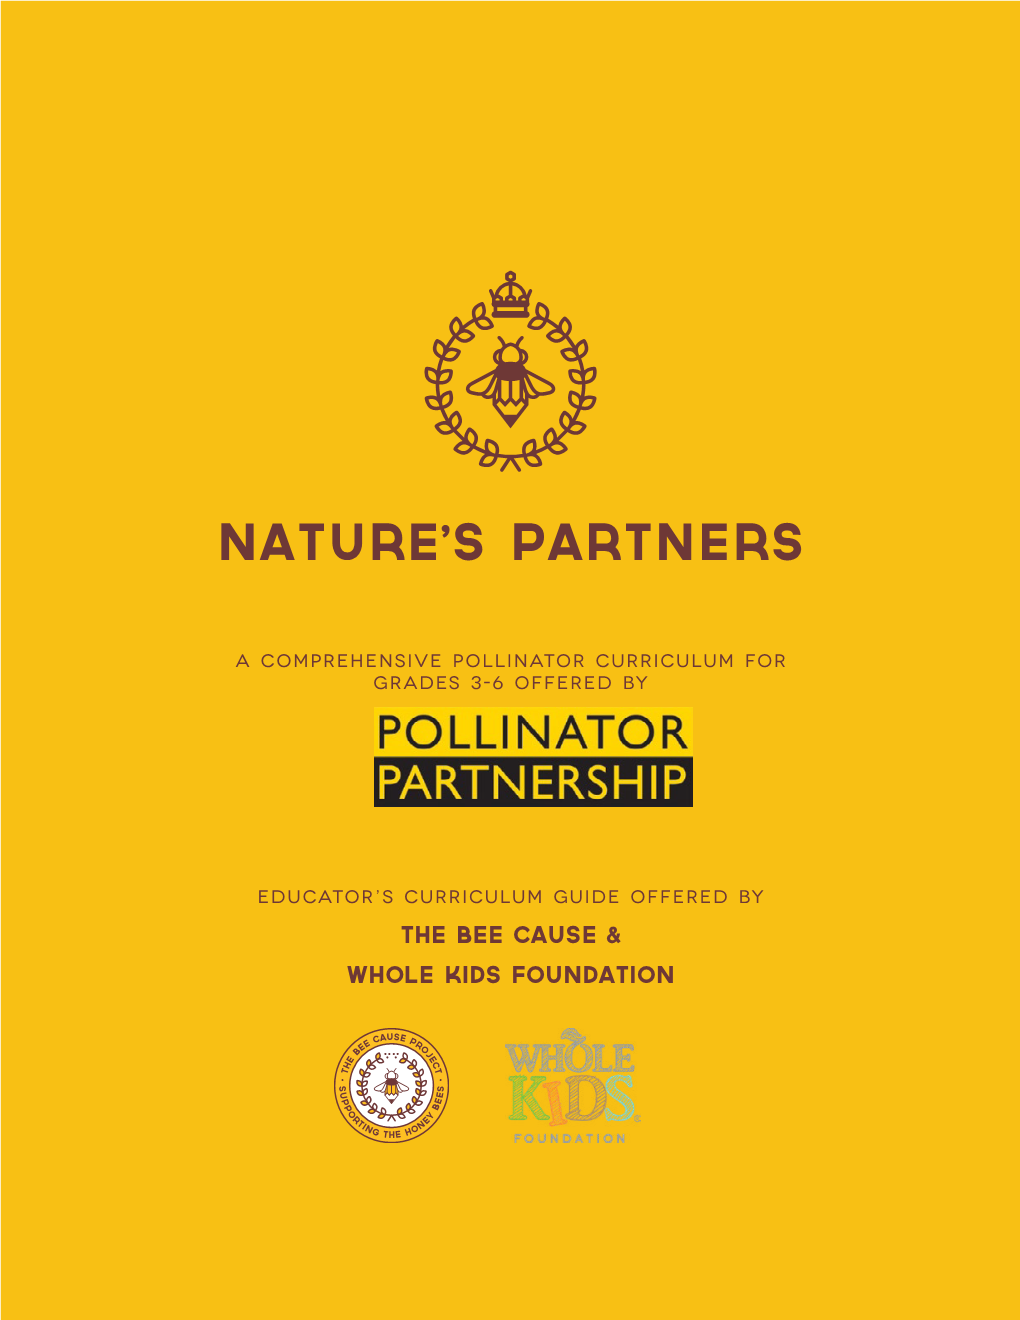 Download the Nature's Partners Grades 3-6